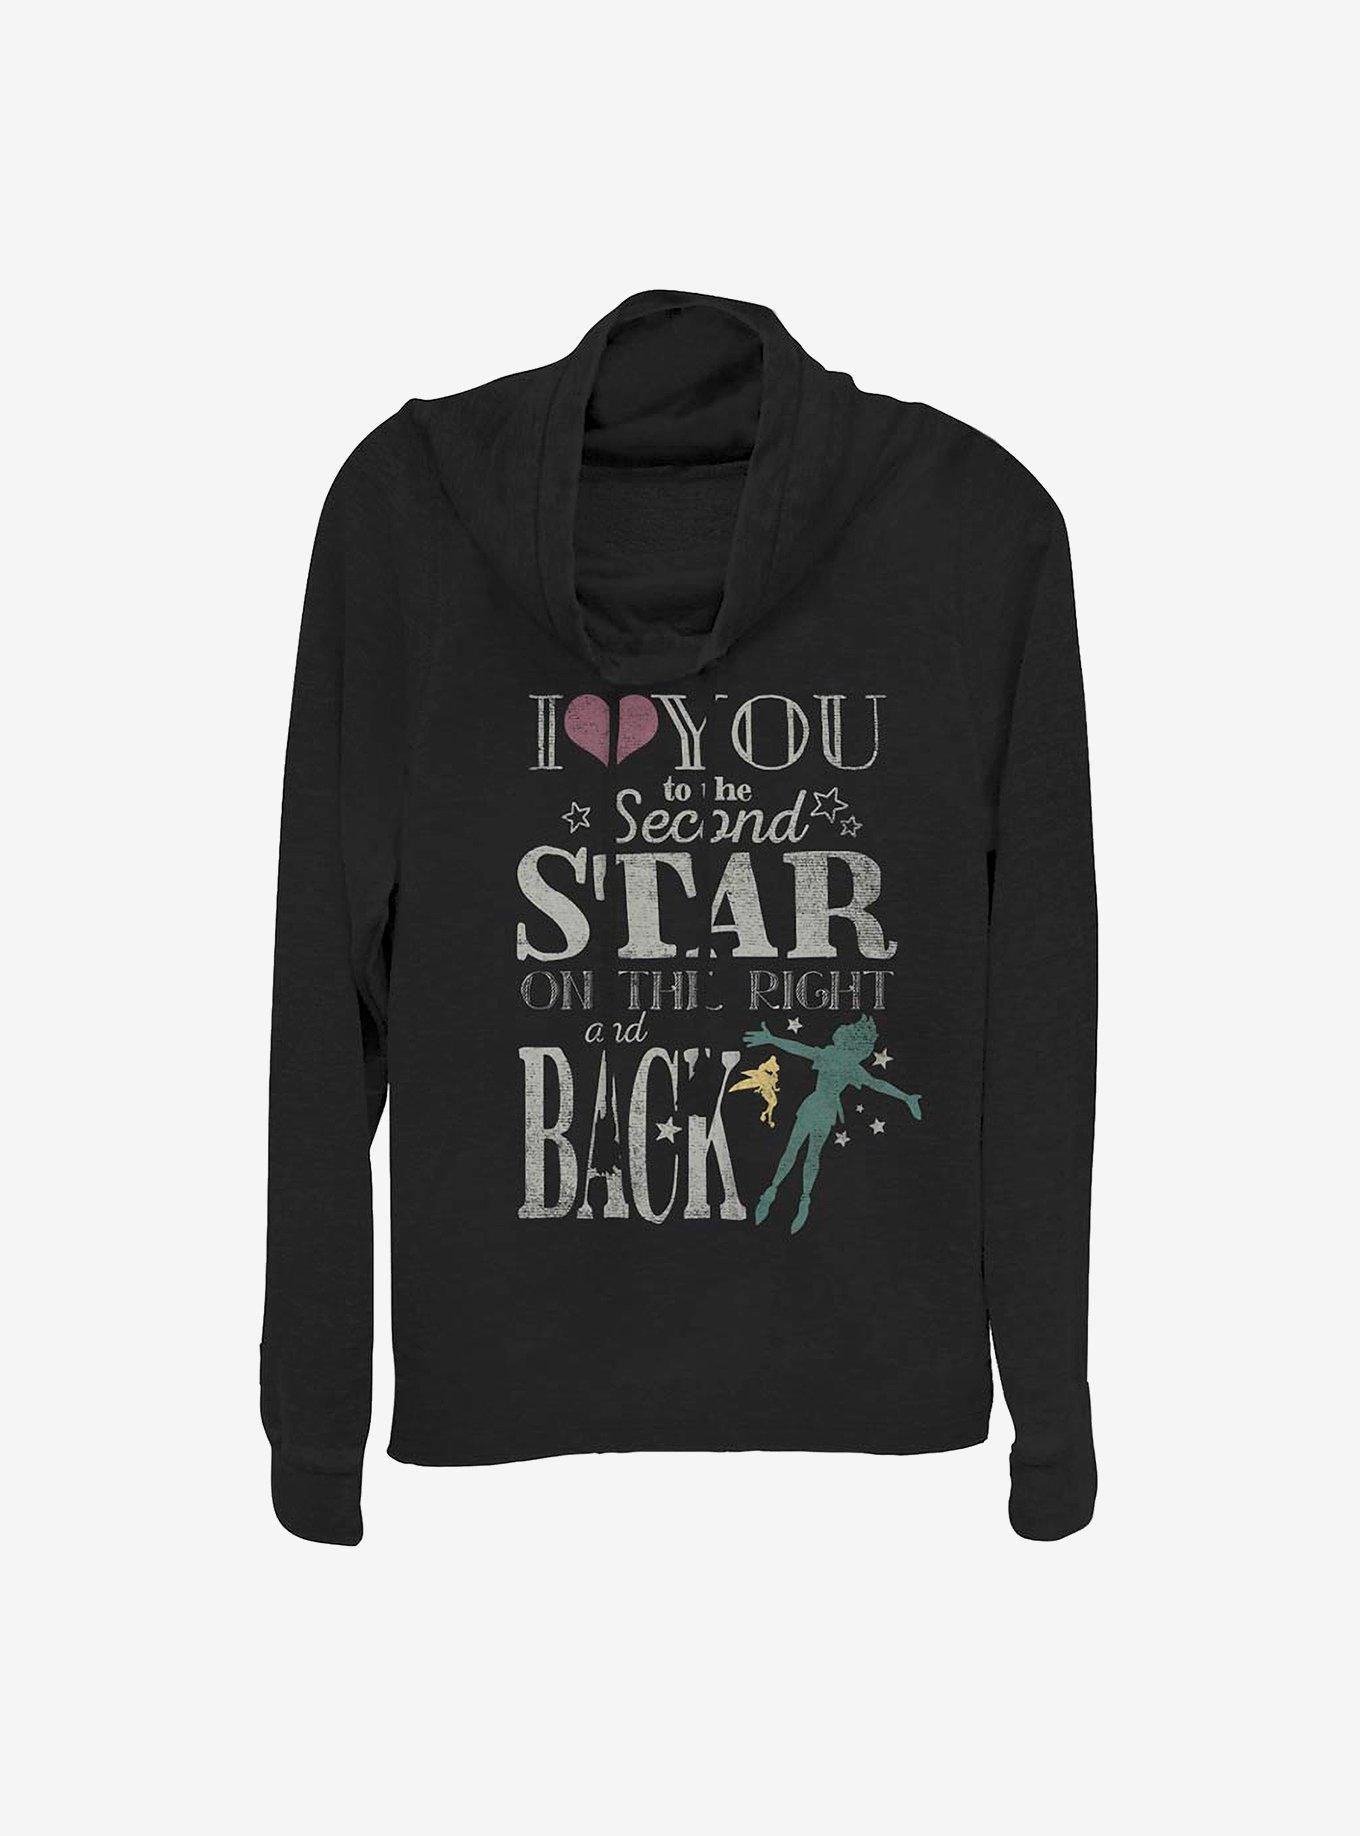 Disney Peter Pan Love You To The Second Star Cowlneck Long-Sleeve Girls Top, BLACK, hi-res